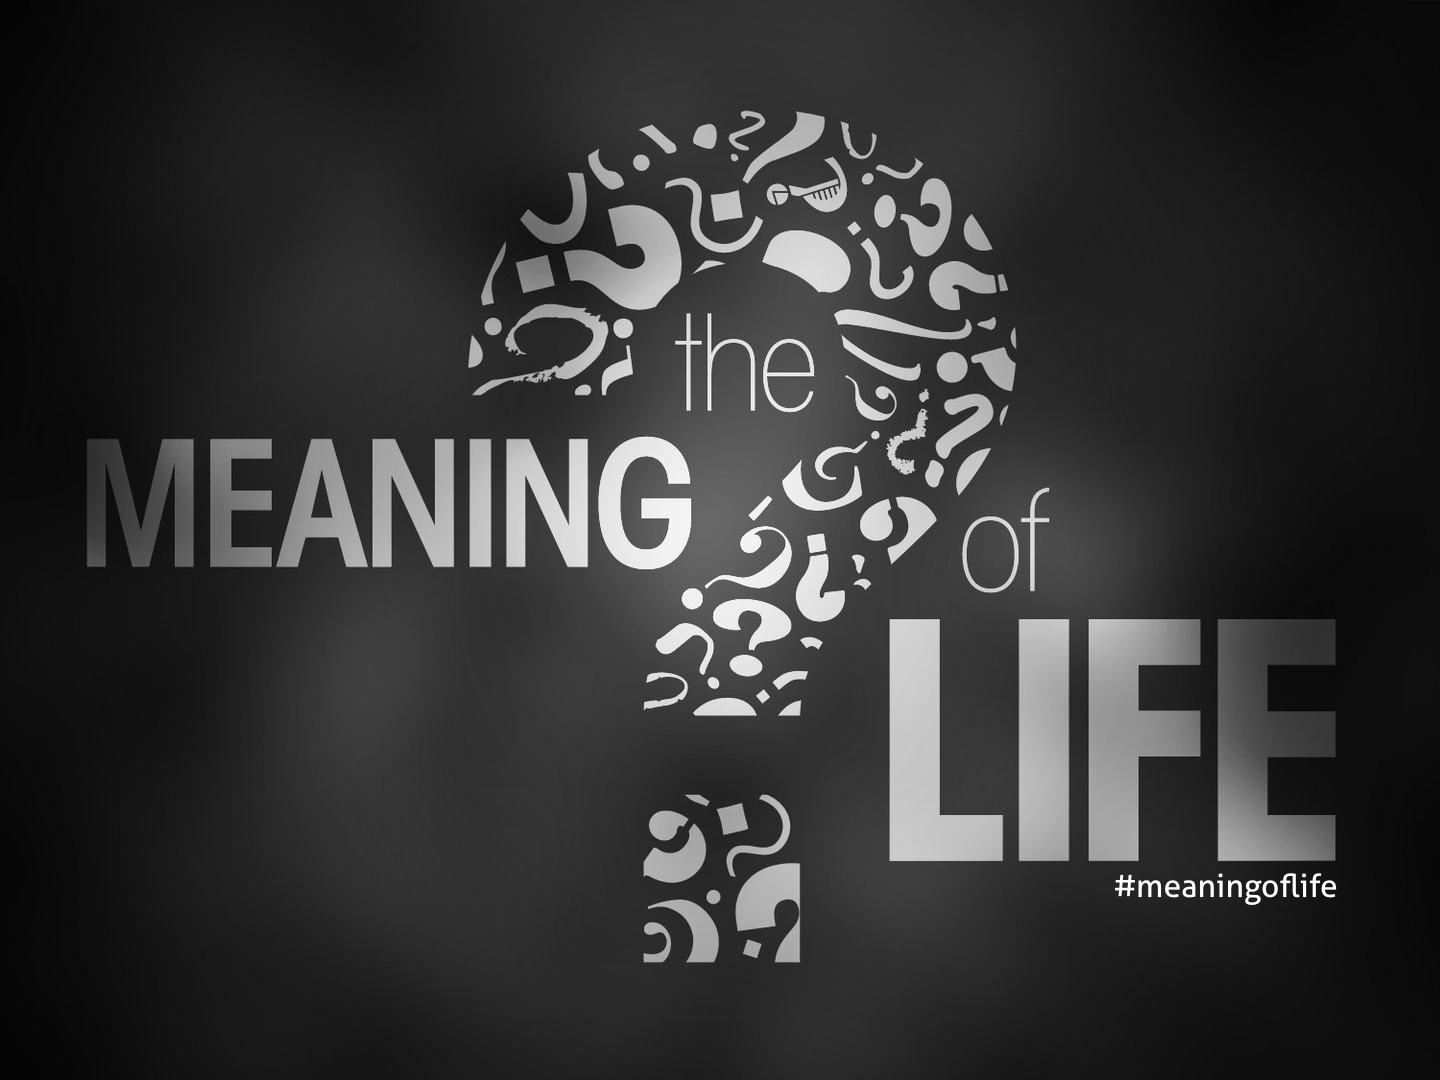 The Meaning of Life: Pleasure?